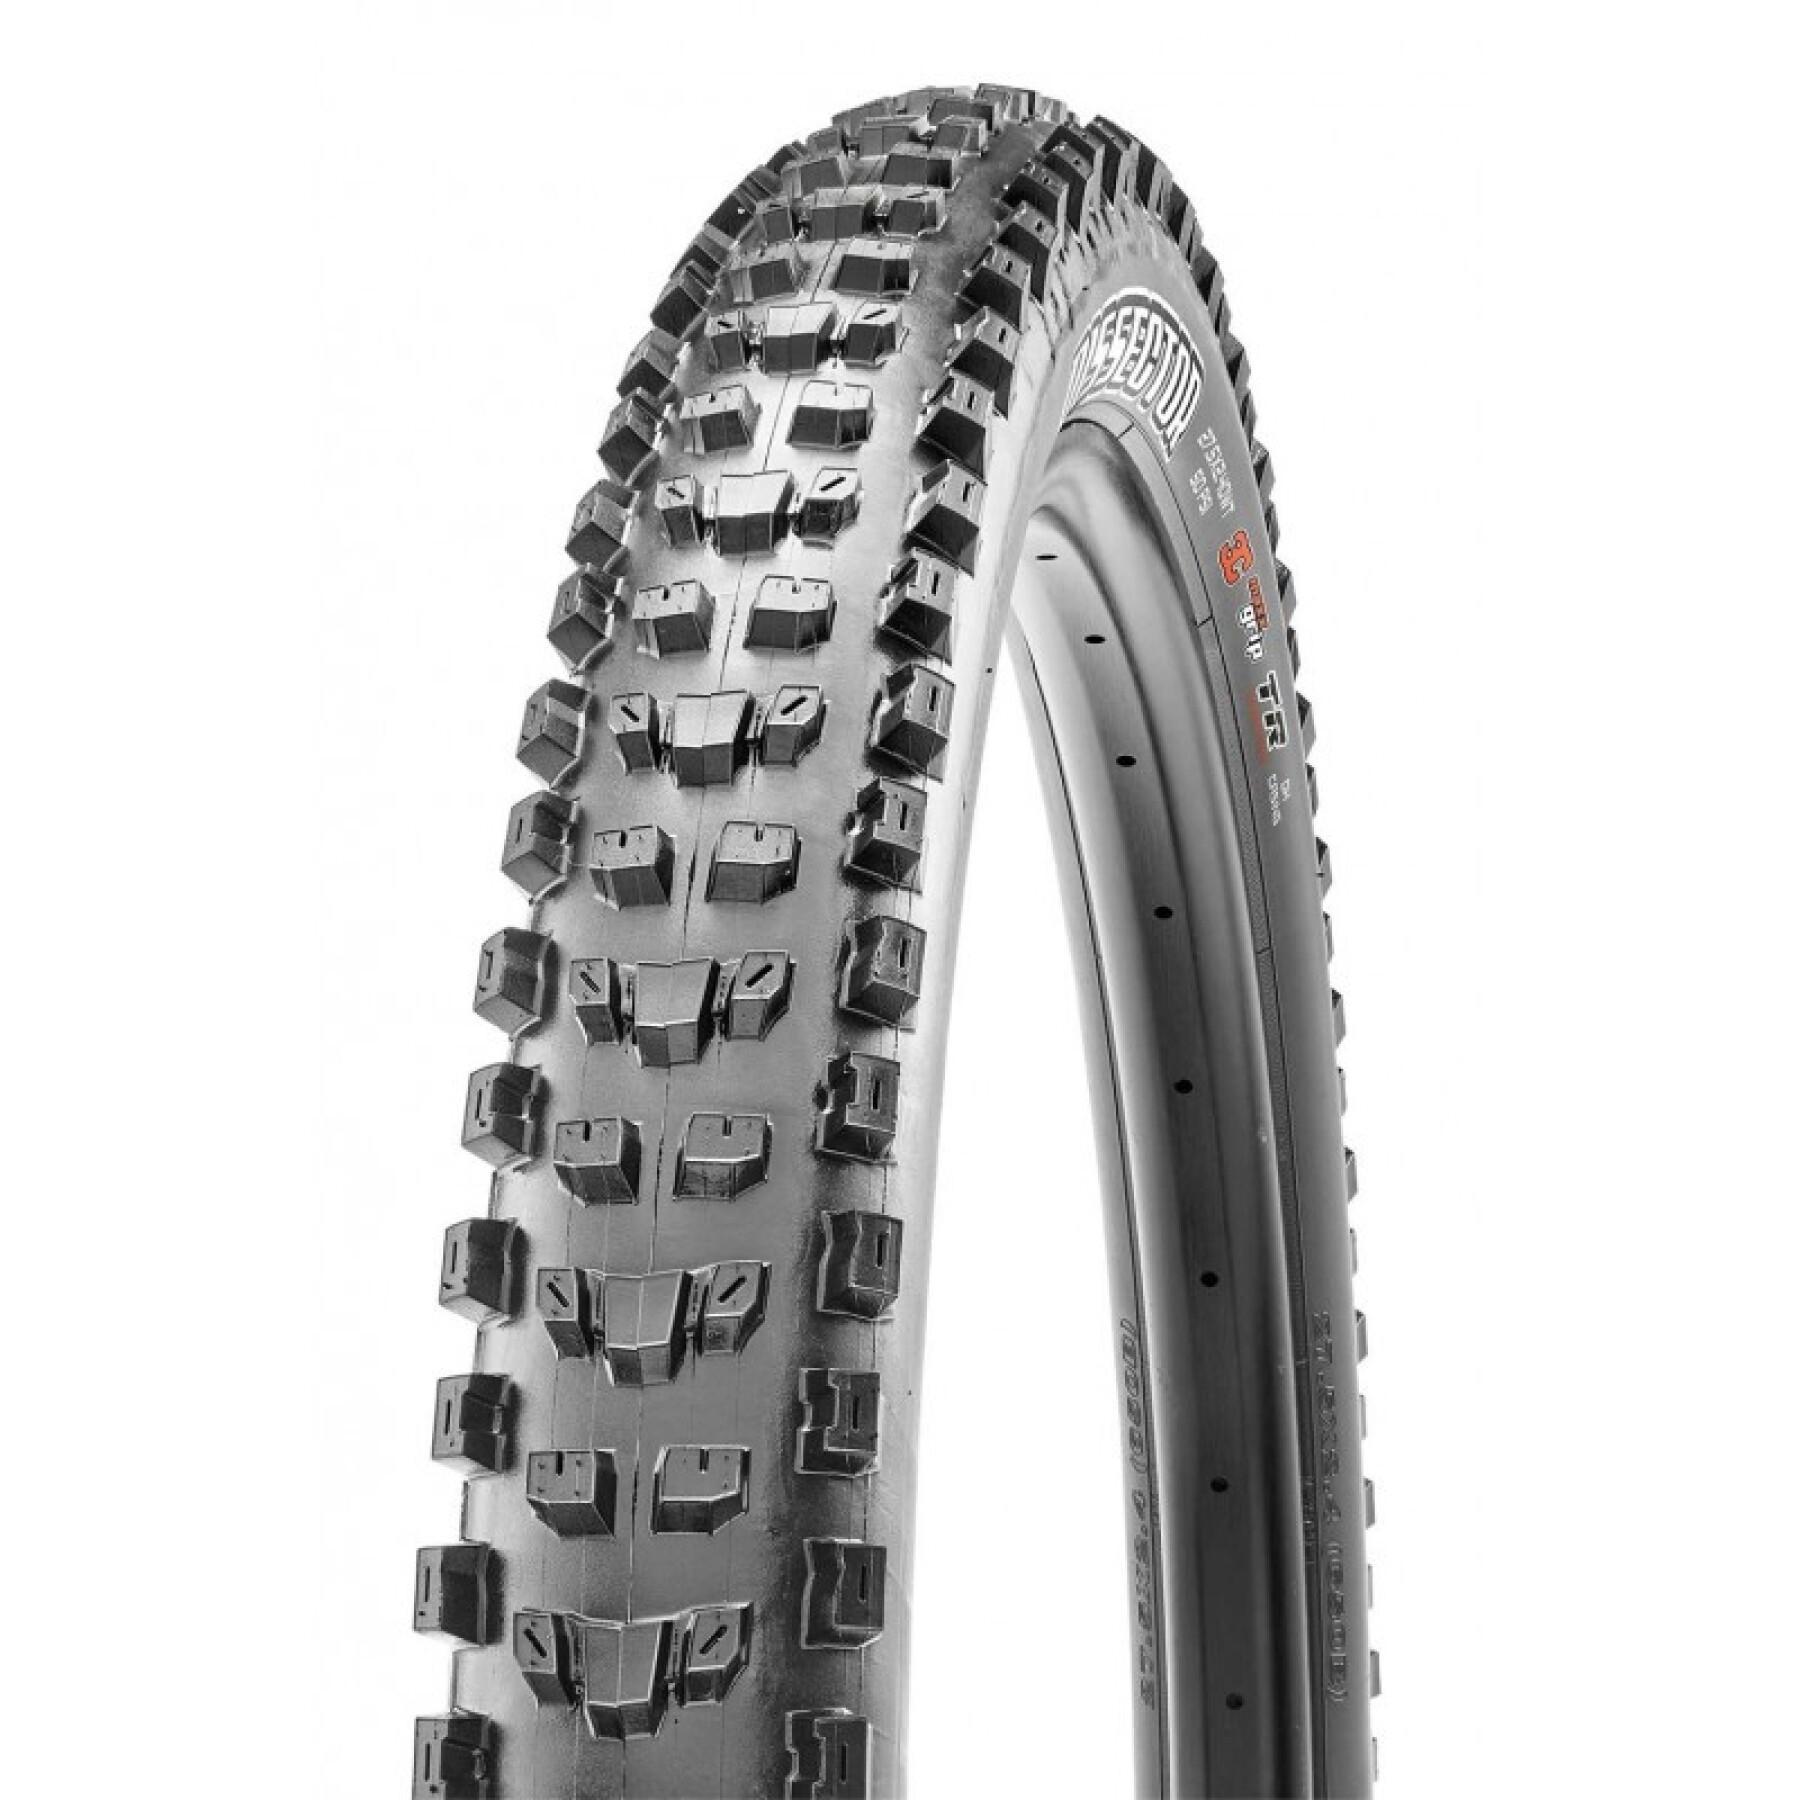 Soft tire Maxxis Dissector (Wide Trail) - tr. souple - 3C Grip / Tubeless Ready / Double Down